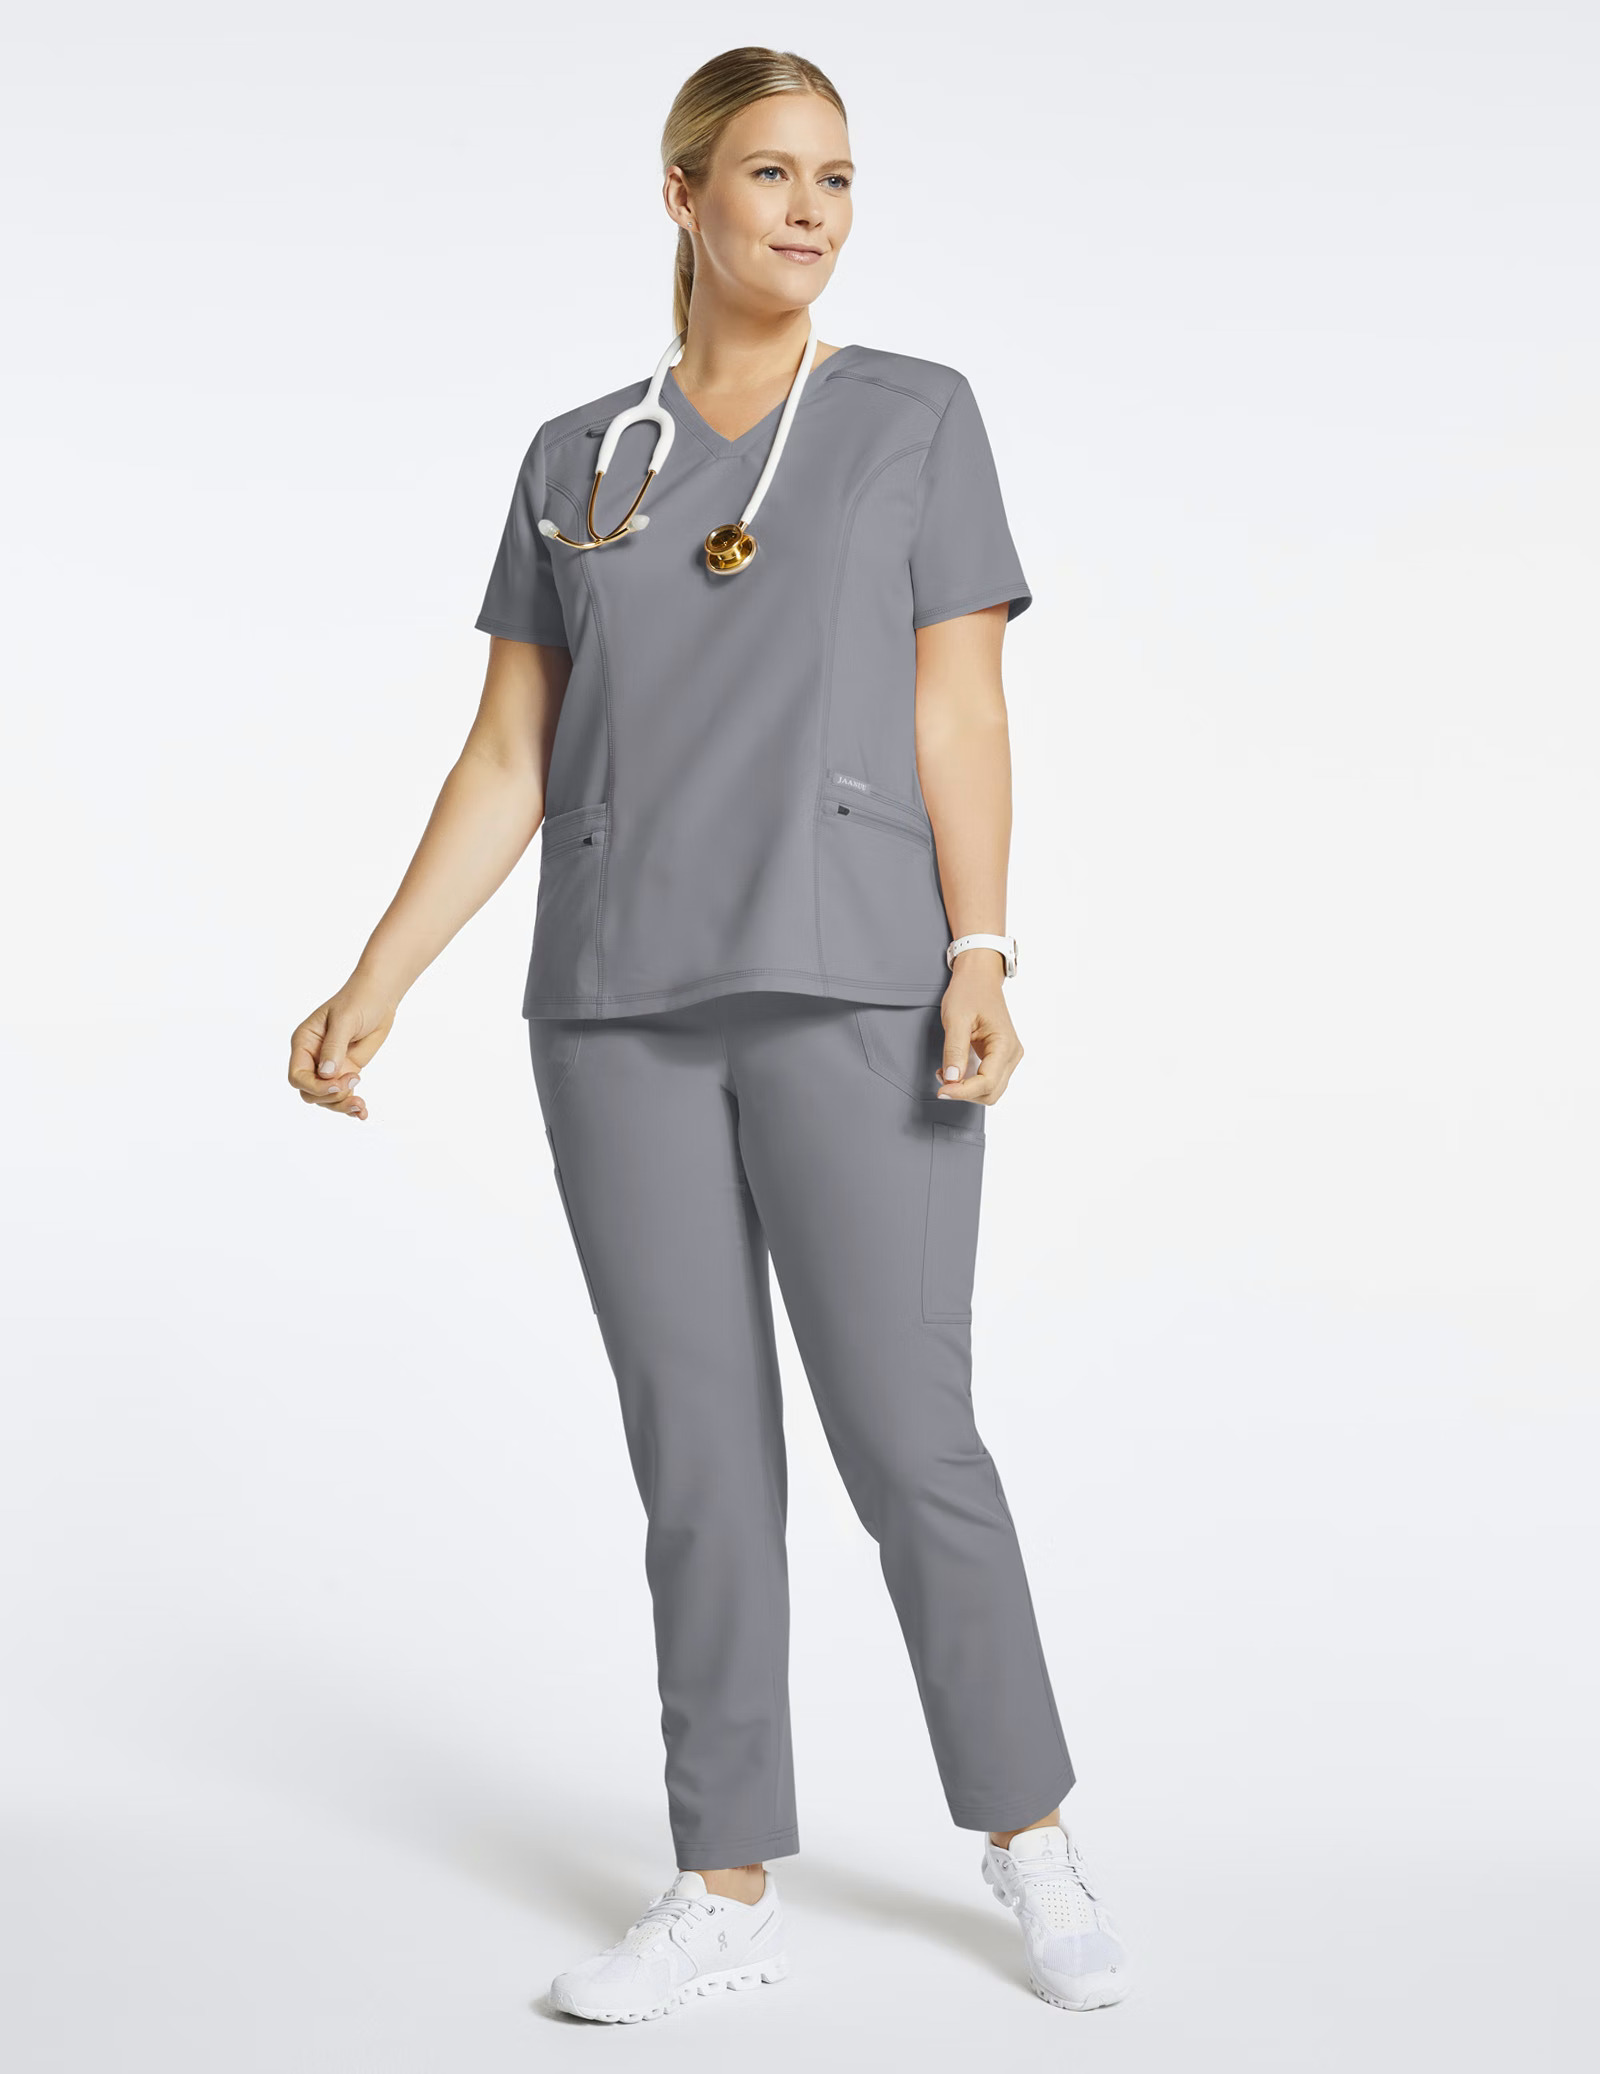 Our 6 Best Scrubs For Every Kind of Woman